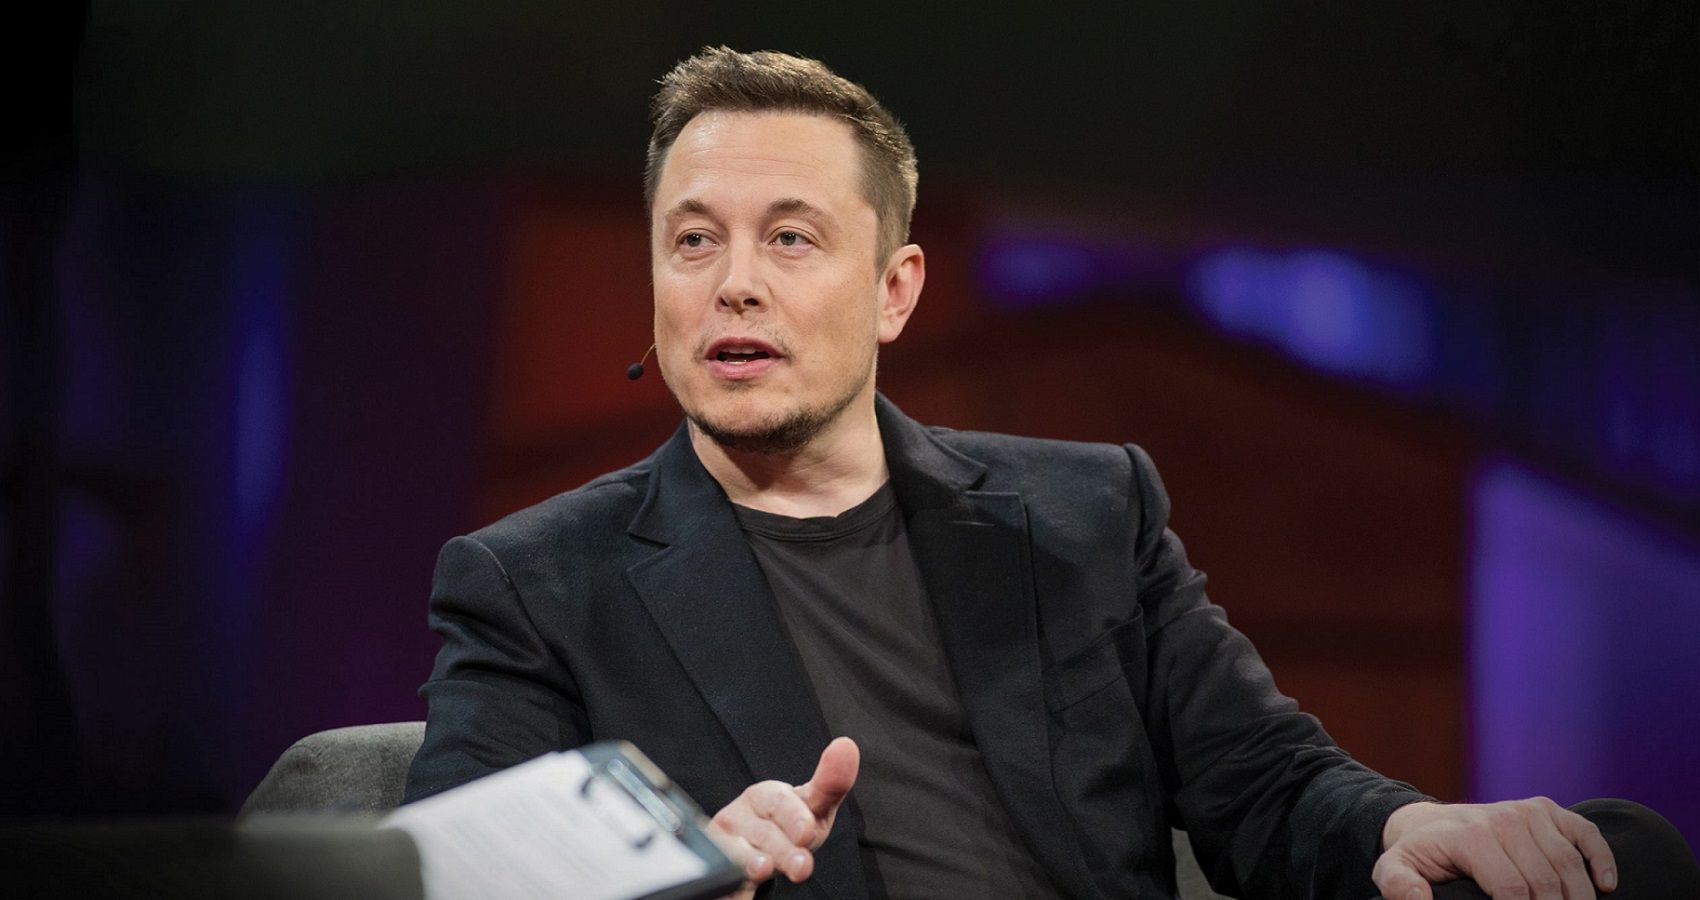 Elon Musk On Stage speaking at TED talk